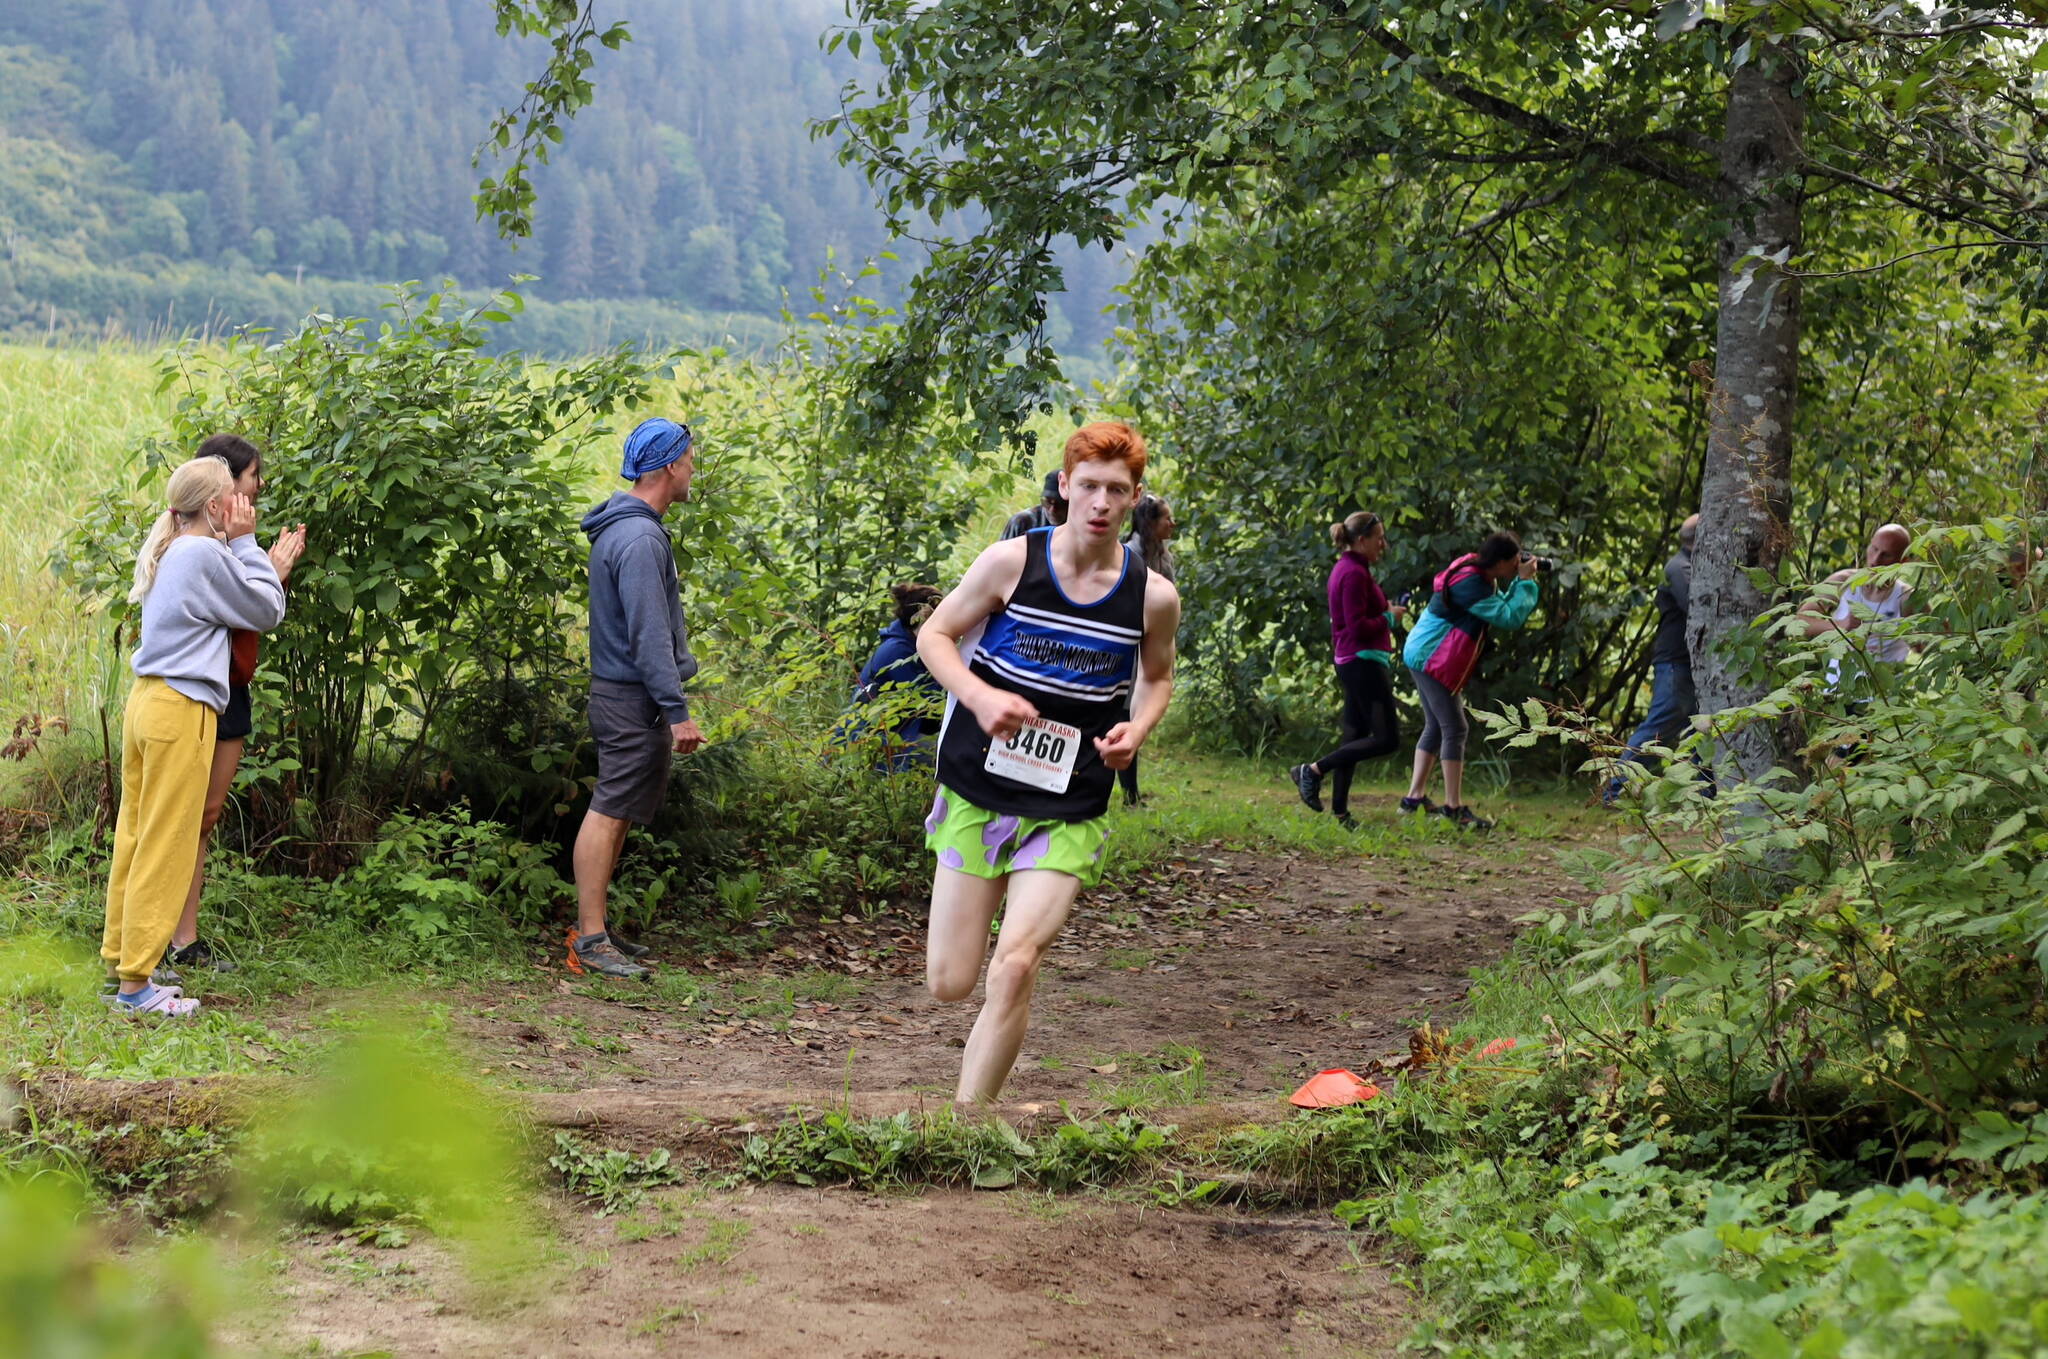 Thunder Mountain High School freshman racer Erik Thompson runs solo up a hill during the Sayeik Invitational on Douglas Saturday morning. Thompson finished the race third with a time of 17 minutes and 20 seconds. (Clarise Larson / Juneau Empire)